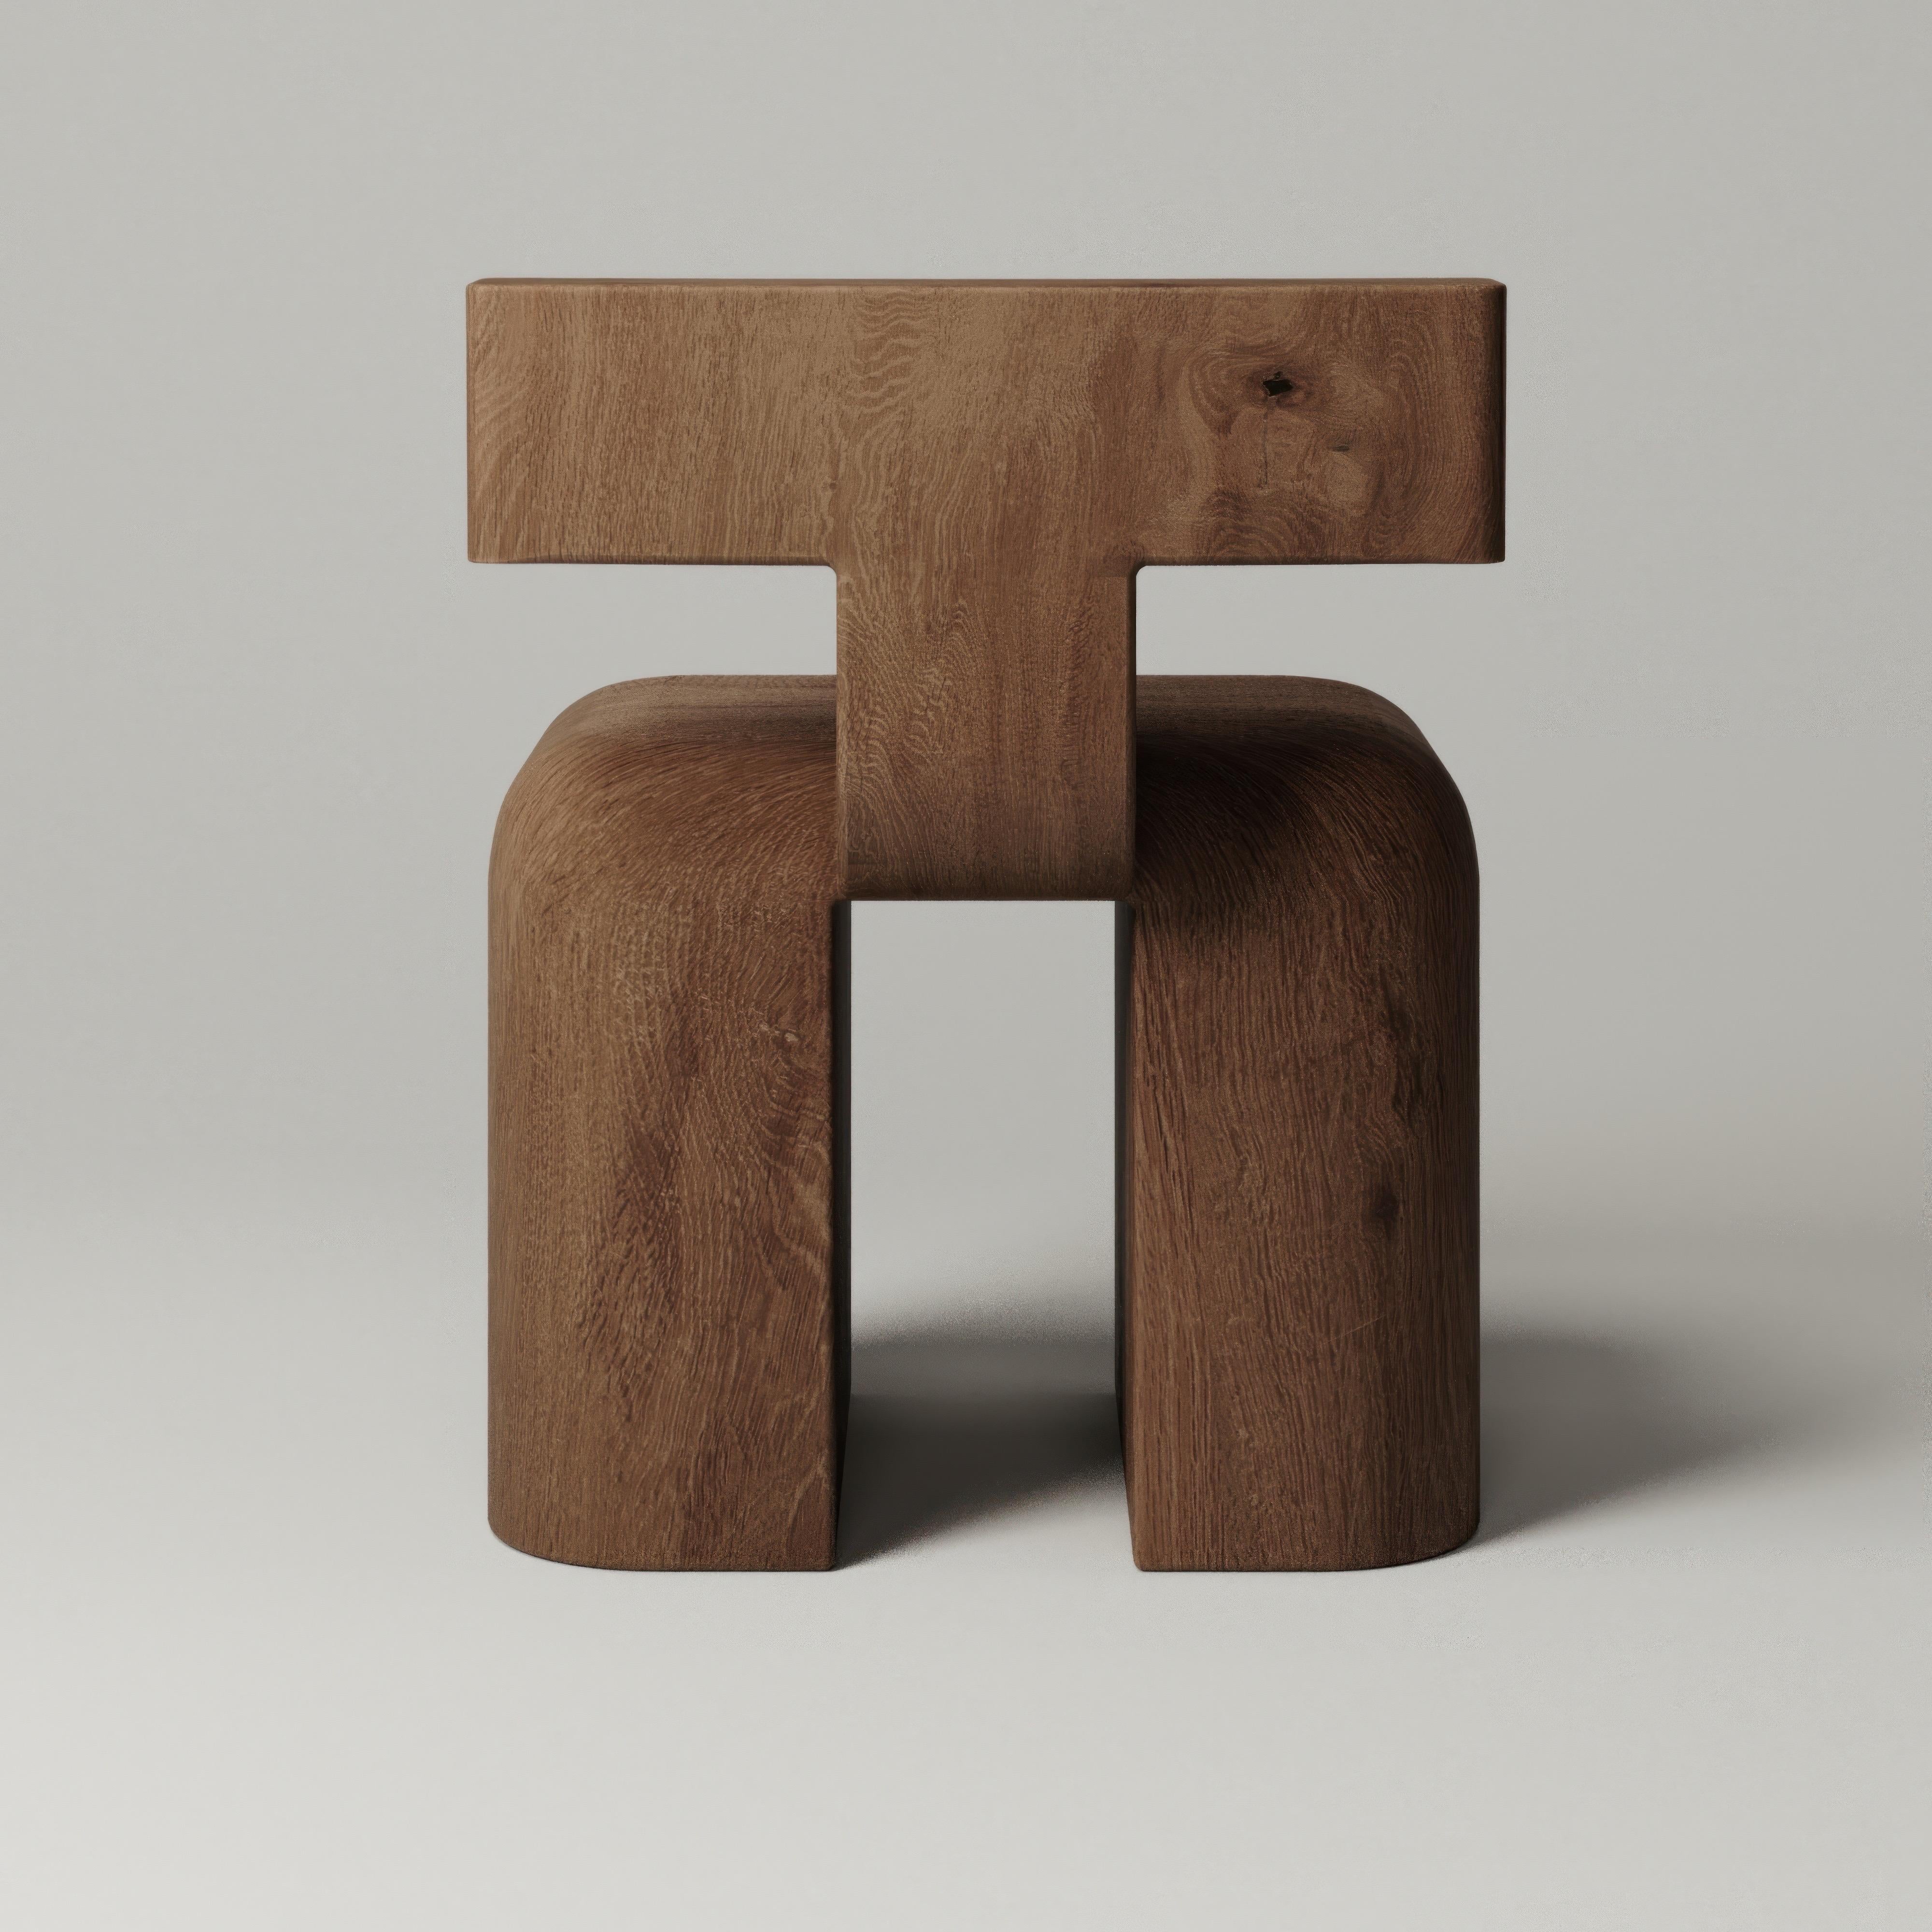 The M_013 Chair is softly carved from solid oak. It's heavily proportioned base and sculptural form make this chair a unique addition to any interior. 

NYC-based design studio Monolith focuses on collectible furniture and homeware by exalting